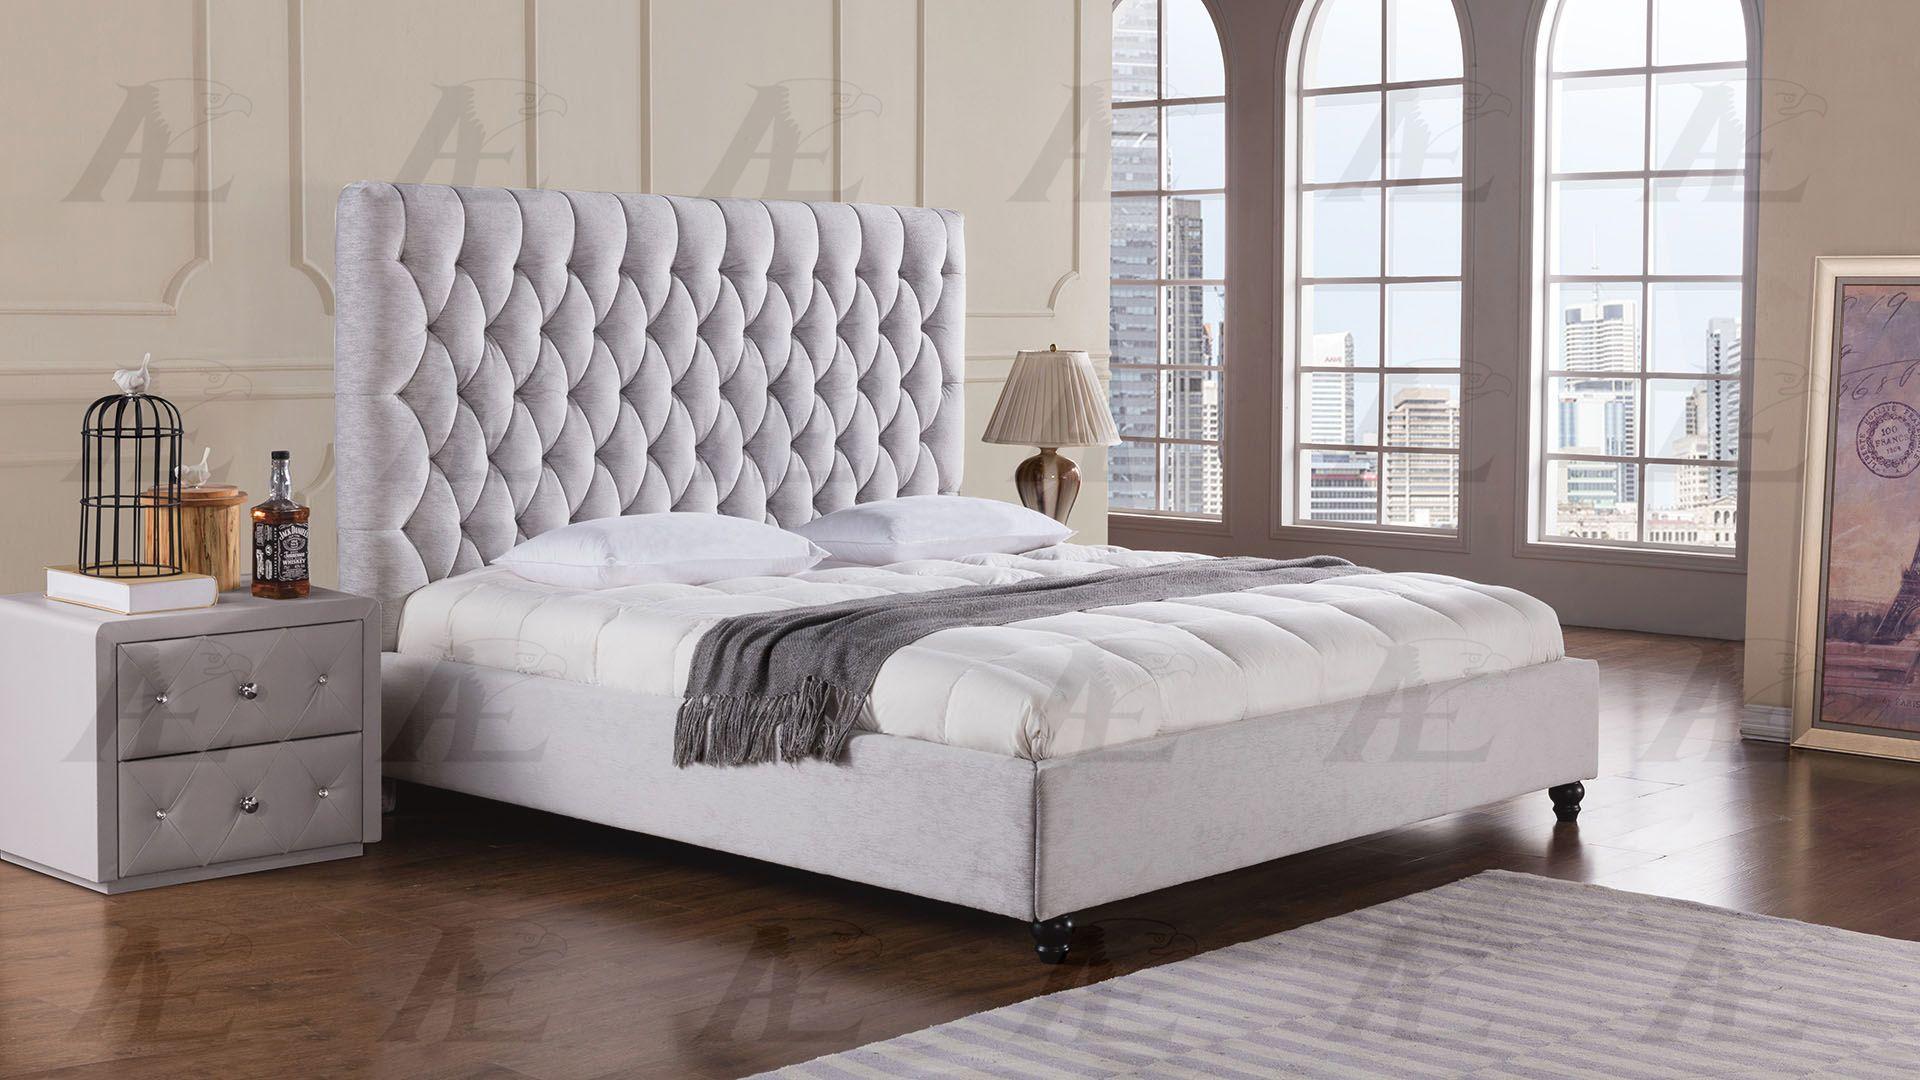 

    
Light Gray Queen Size Bed Fabric Tufted Headboard American Eagle B-D060
